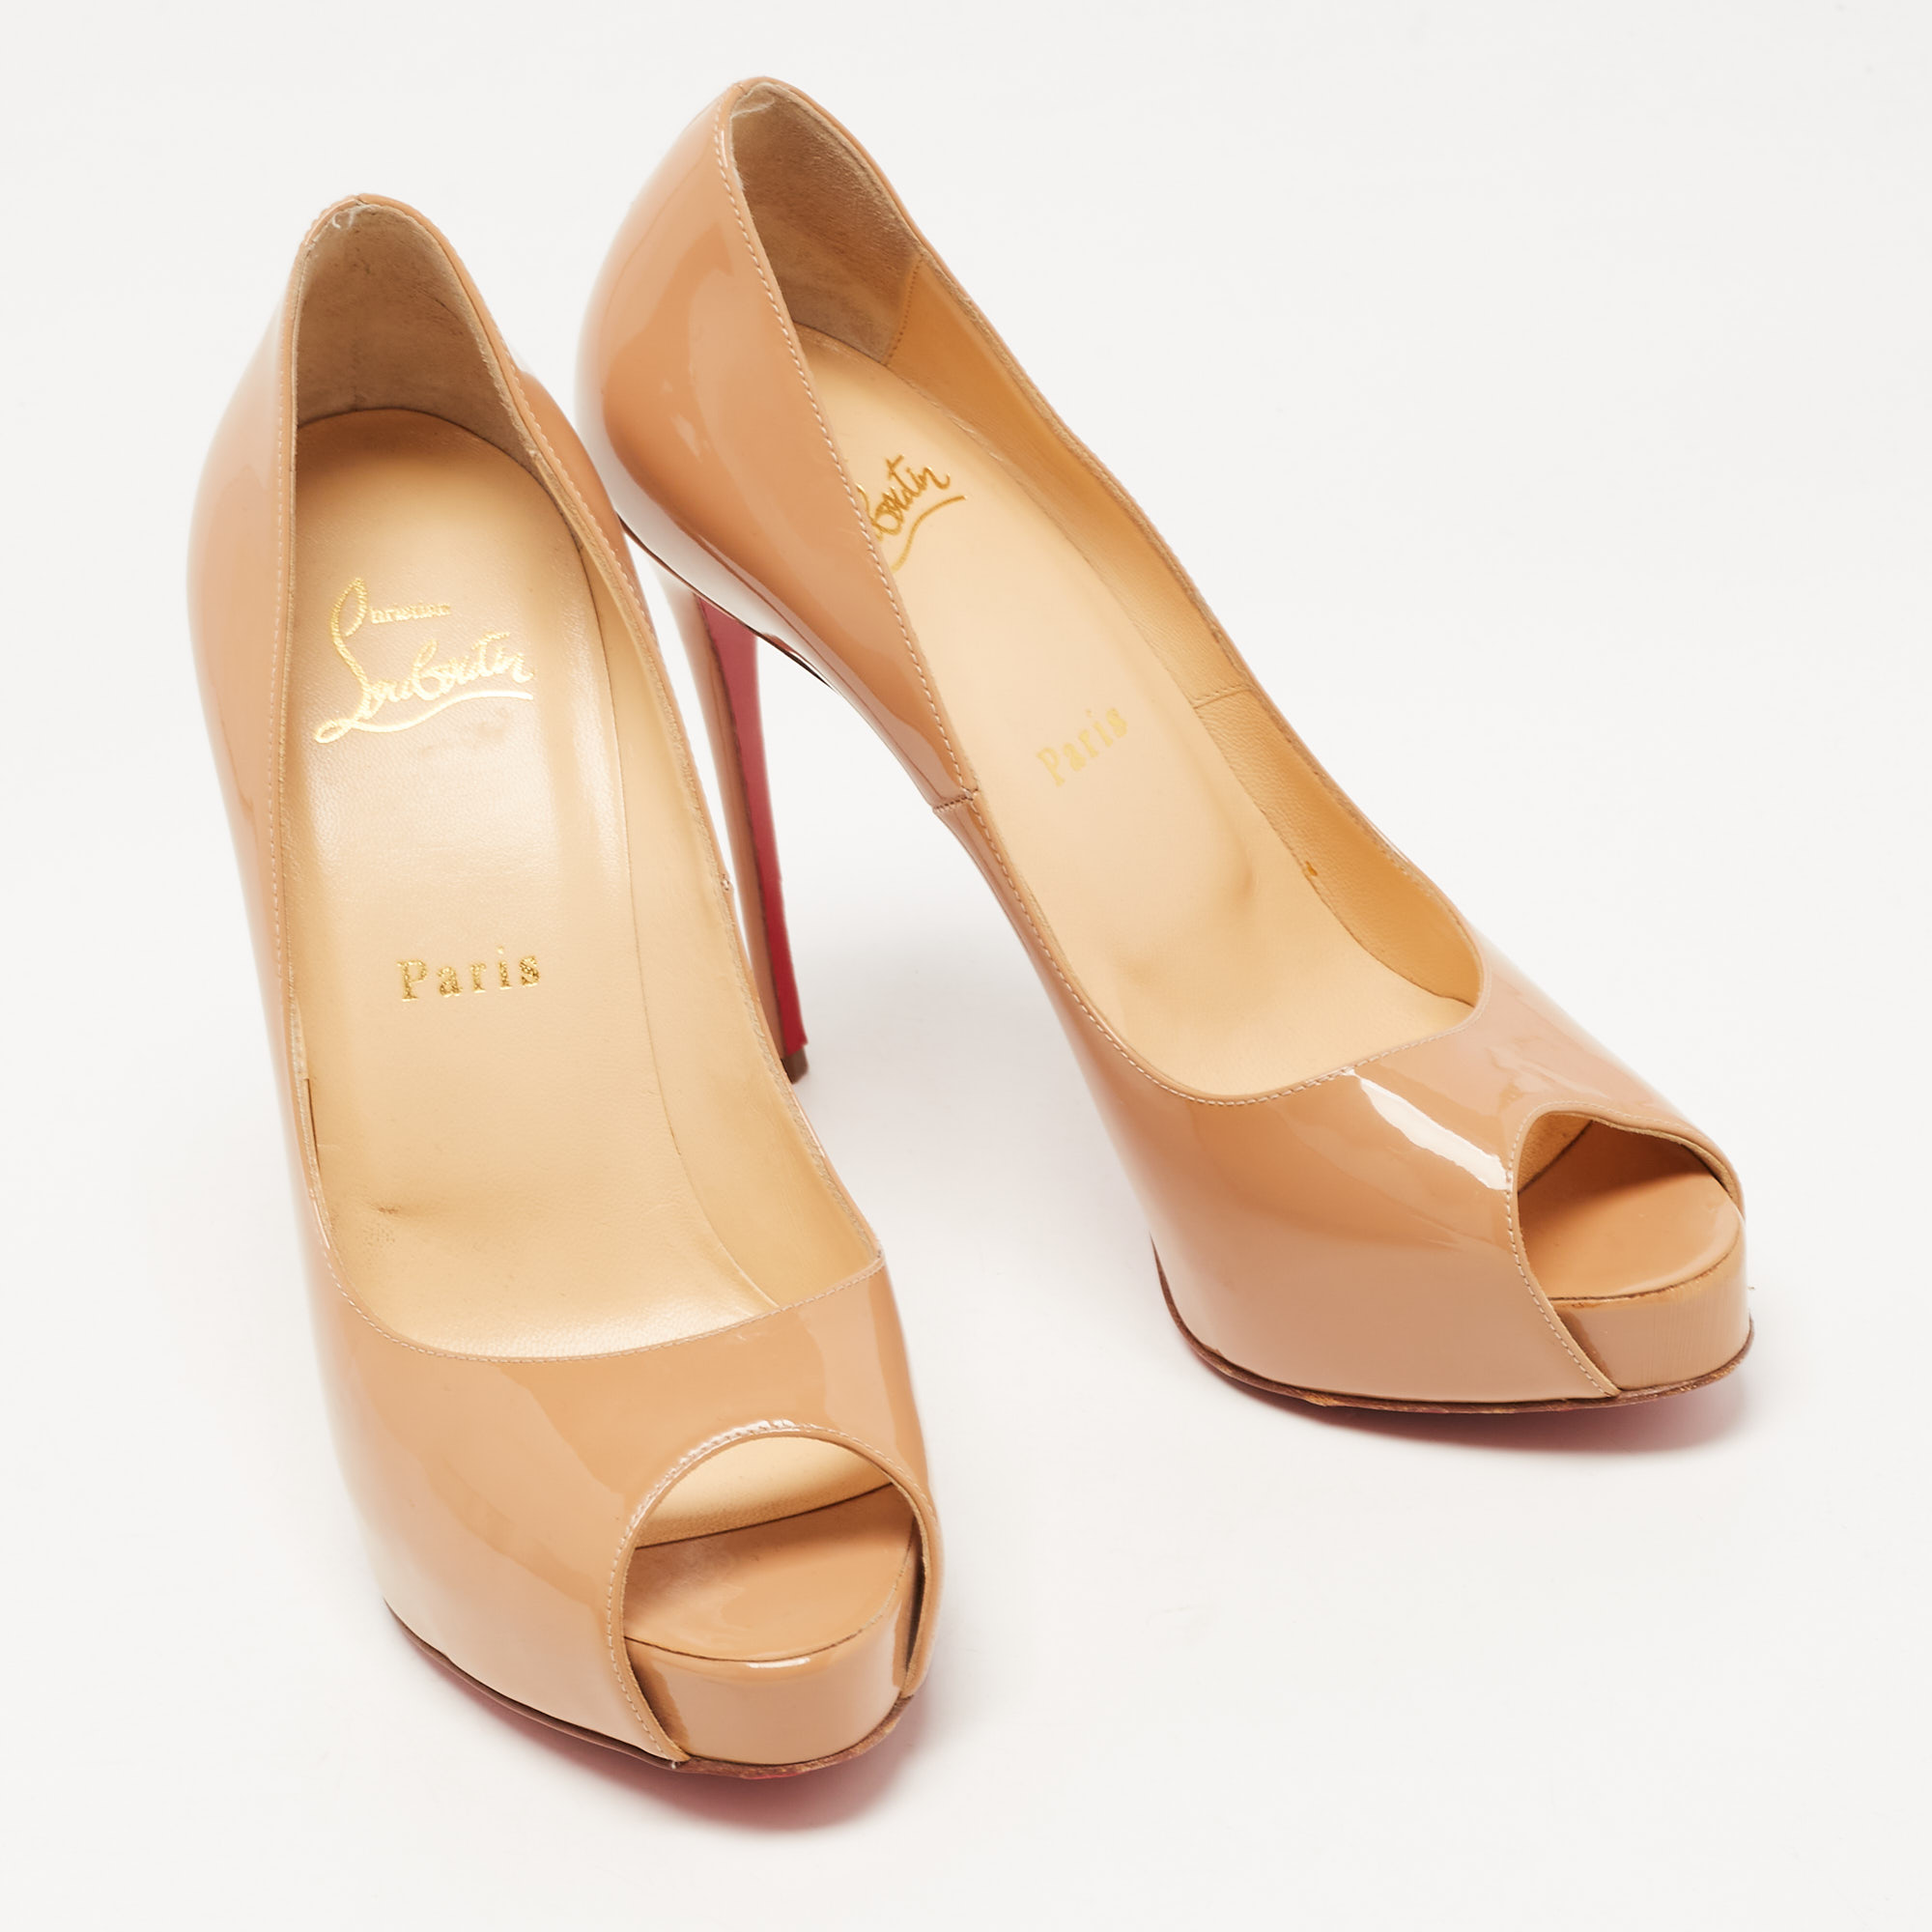 Christian Louboutin Beige Patent Leather New Very Prive Pumps Size 37.5